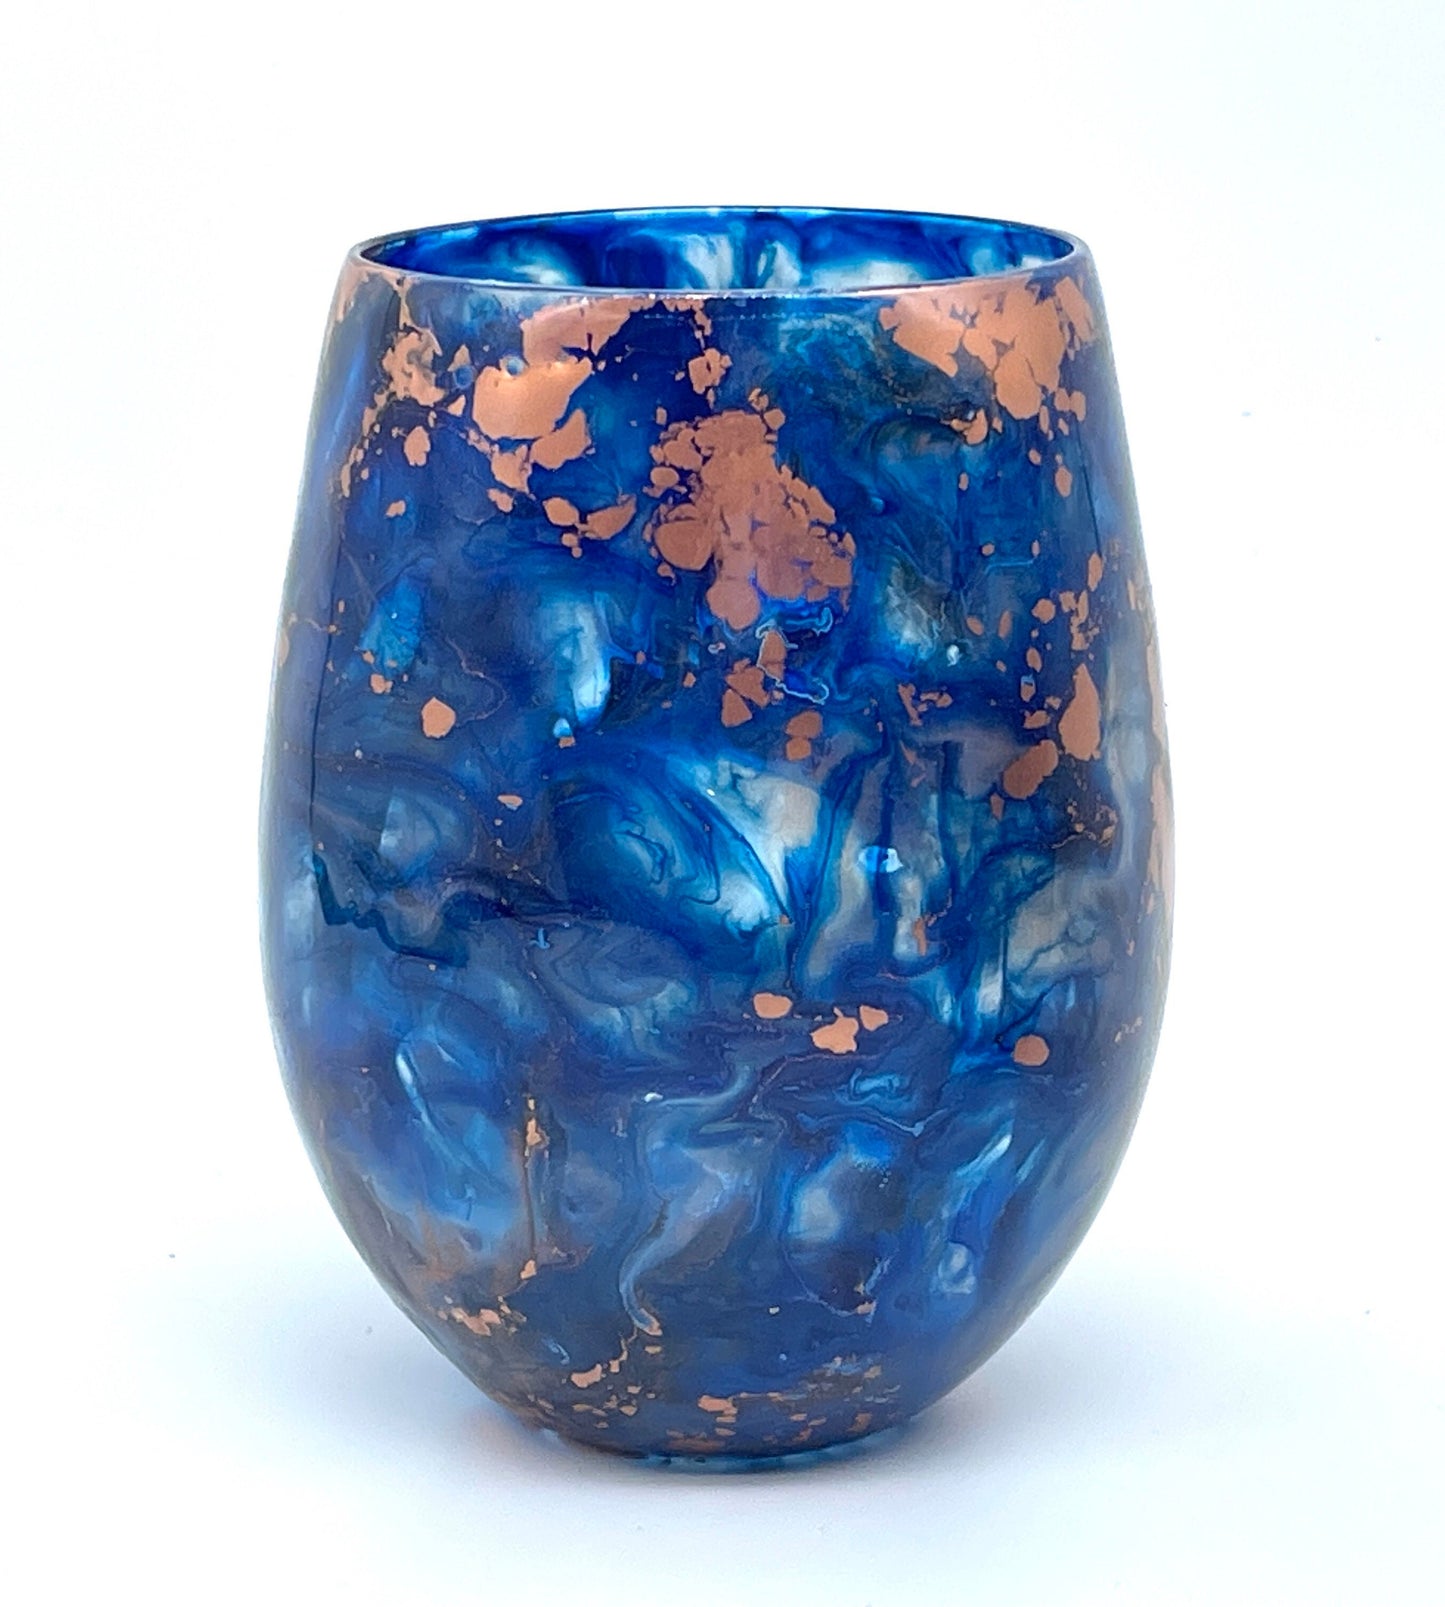 Navy Blue and Copper Resin Art Stemless Wine Glass Set of Two Customize MADE TO ORDER